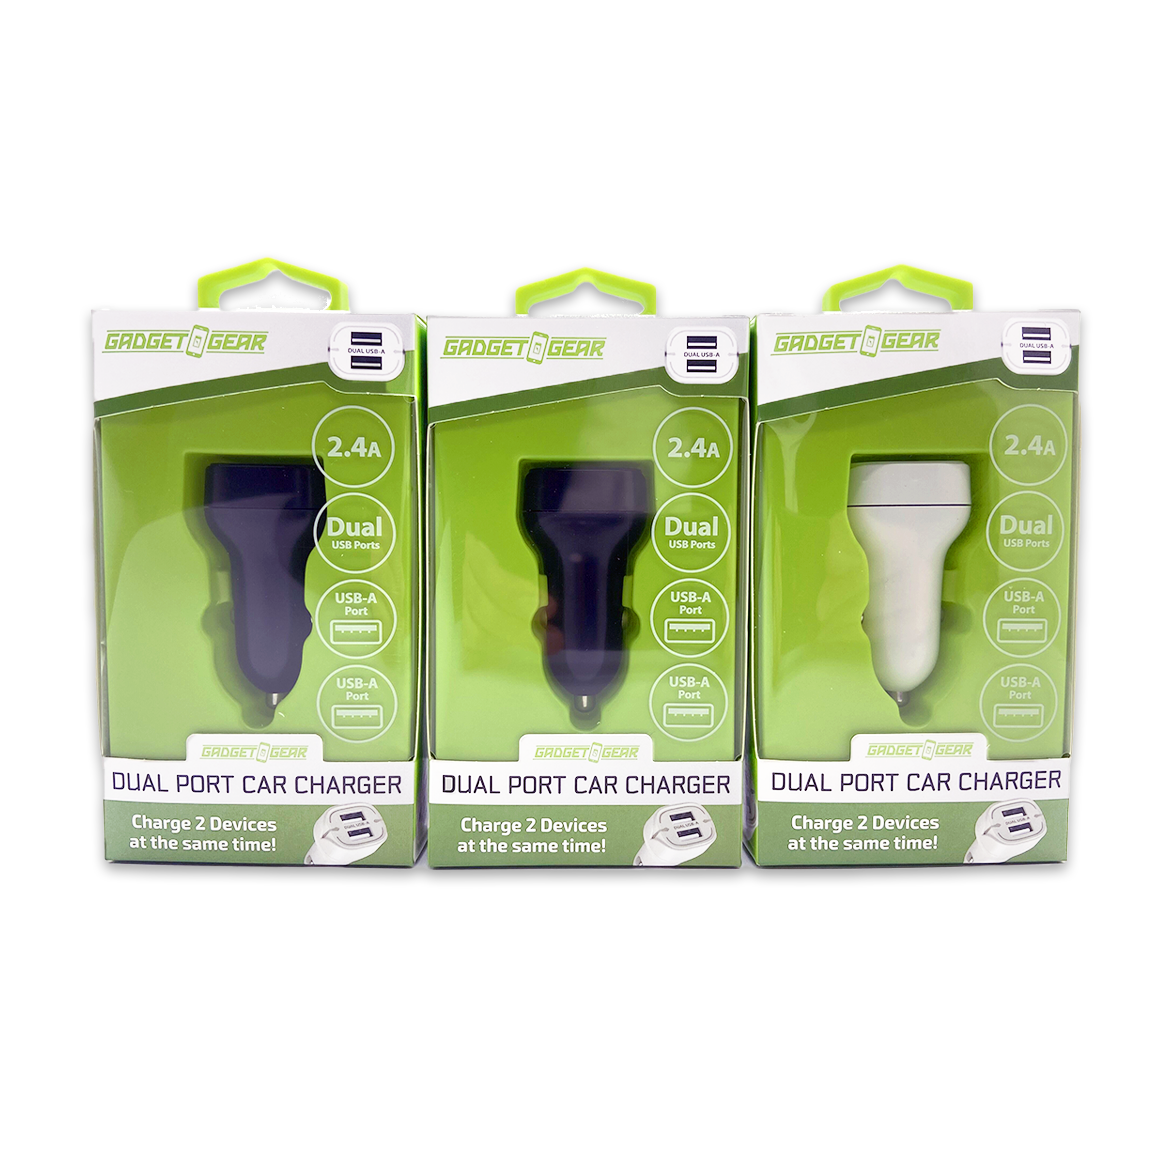 ITEM NUMBER 024632 2.4A CAR CHARGER 3 PIECES PER PACK